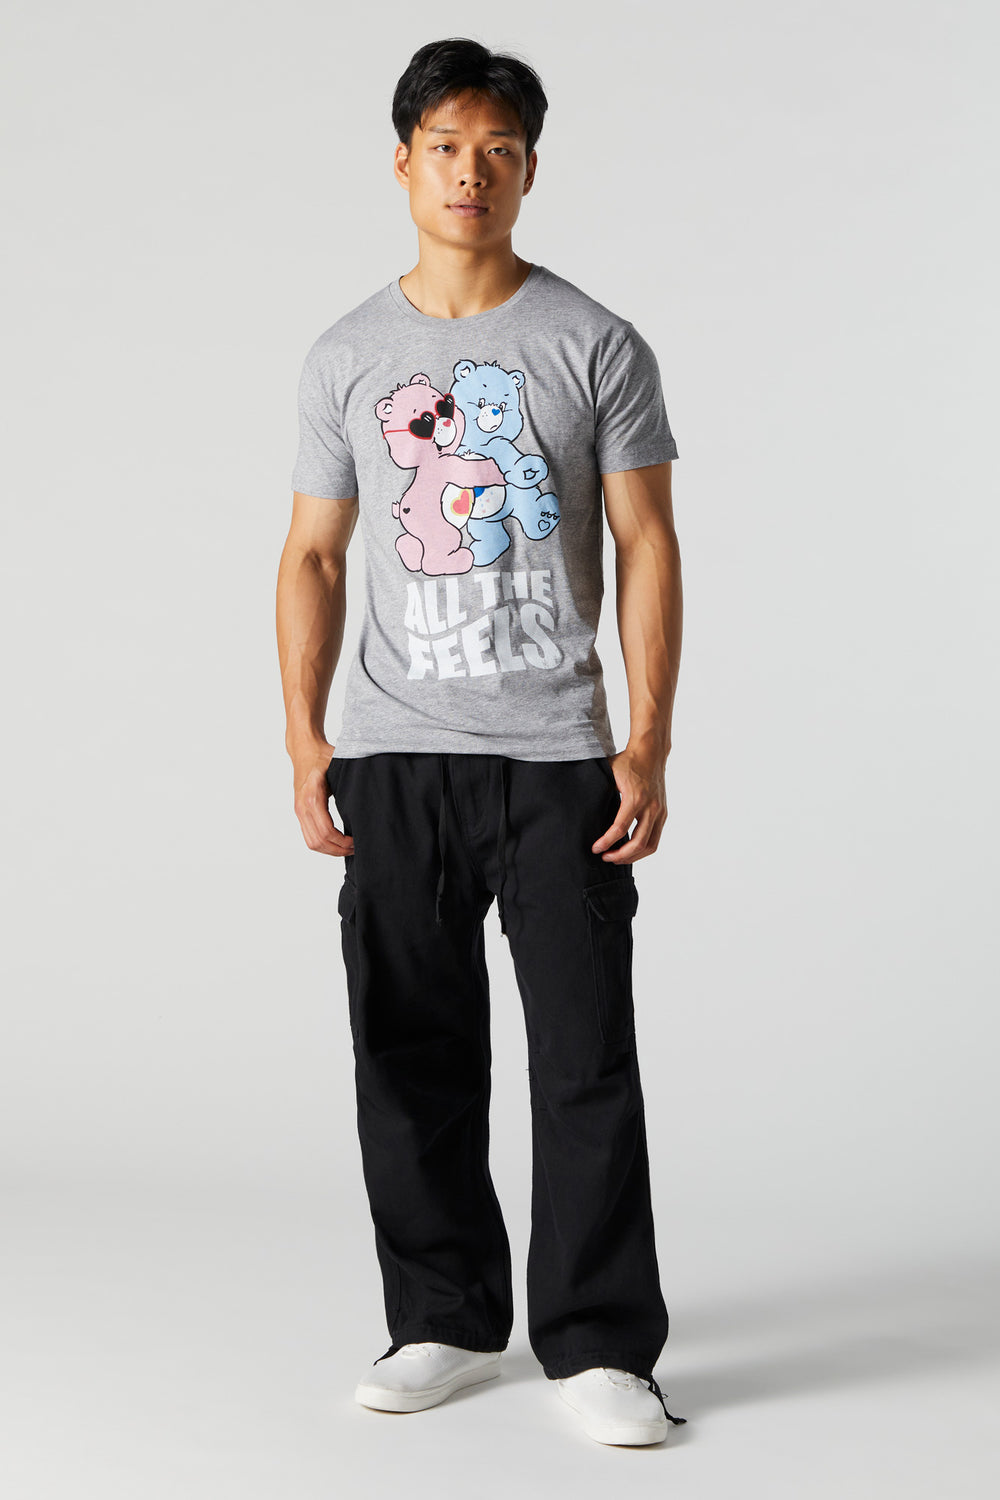 Care Bears Graphic T-Shirt Care Bears Graphic T-Shirt 4